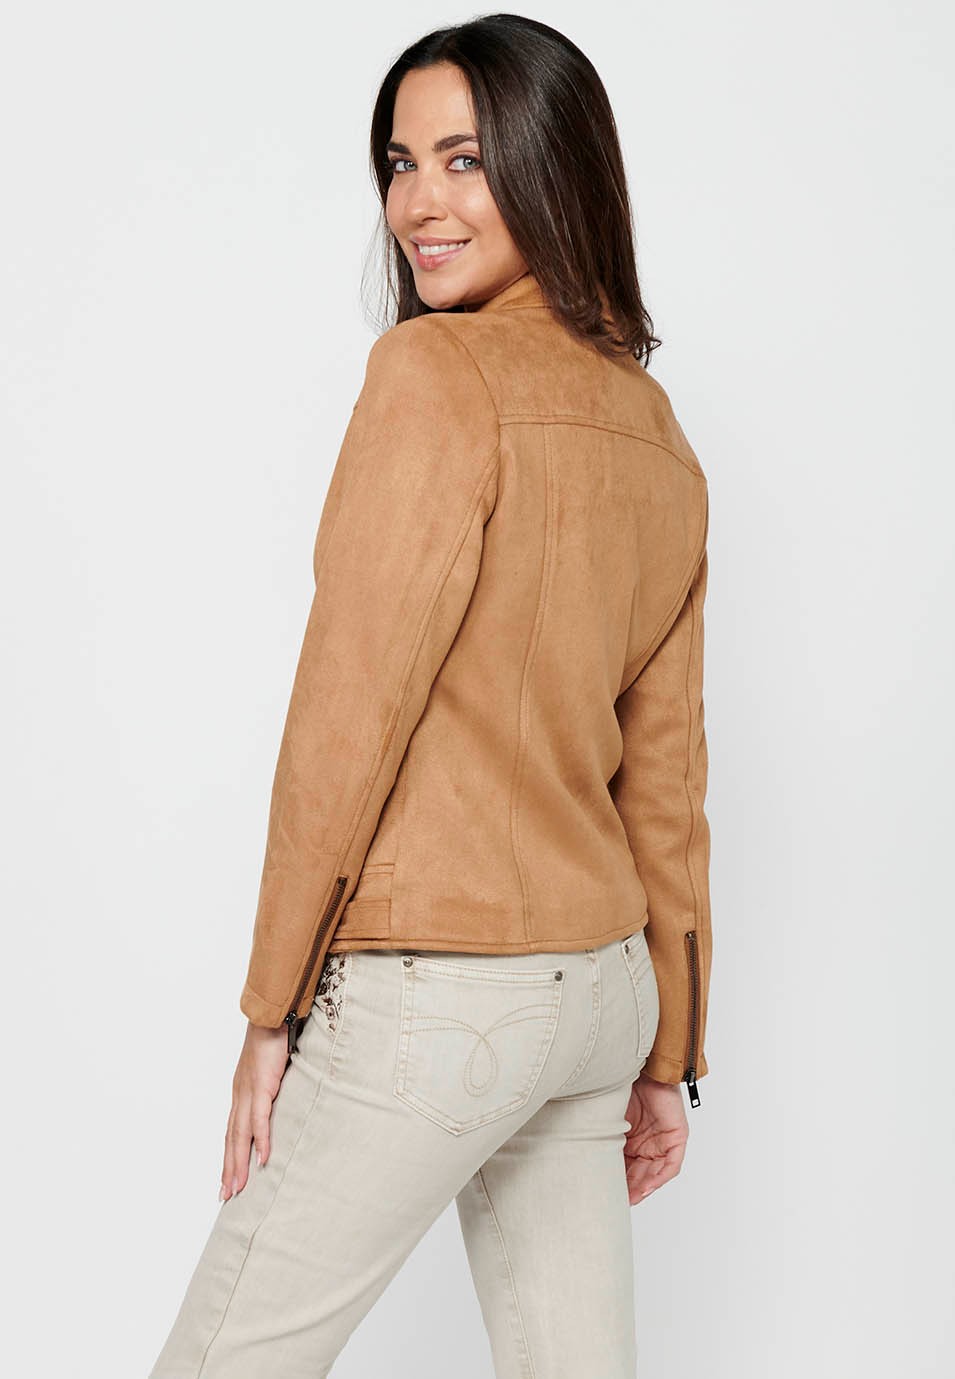 Camel Color Long Sleeve Jacket with Cross-Zip Closure with Lapel Collar and Pockets for Women 9